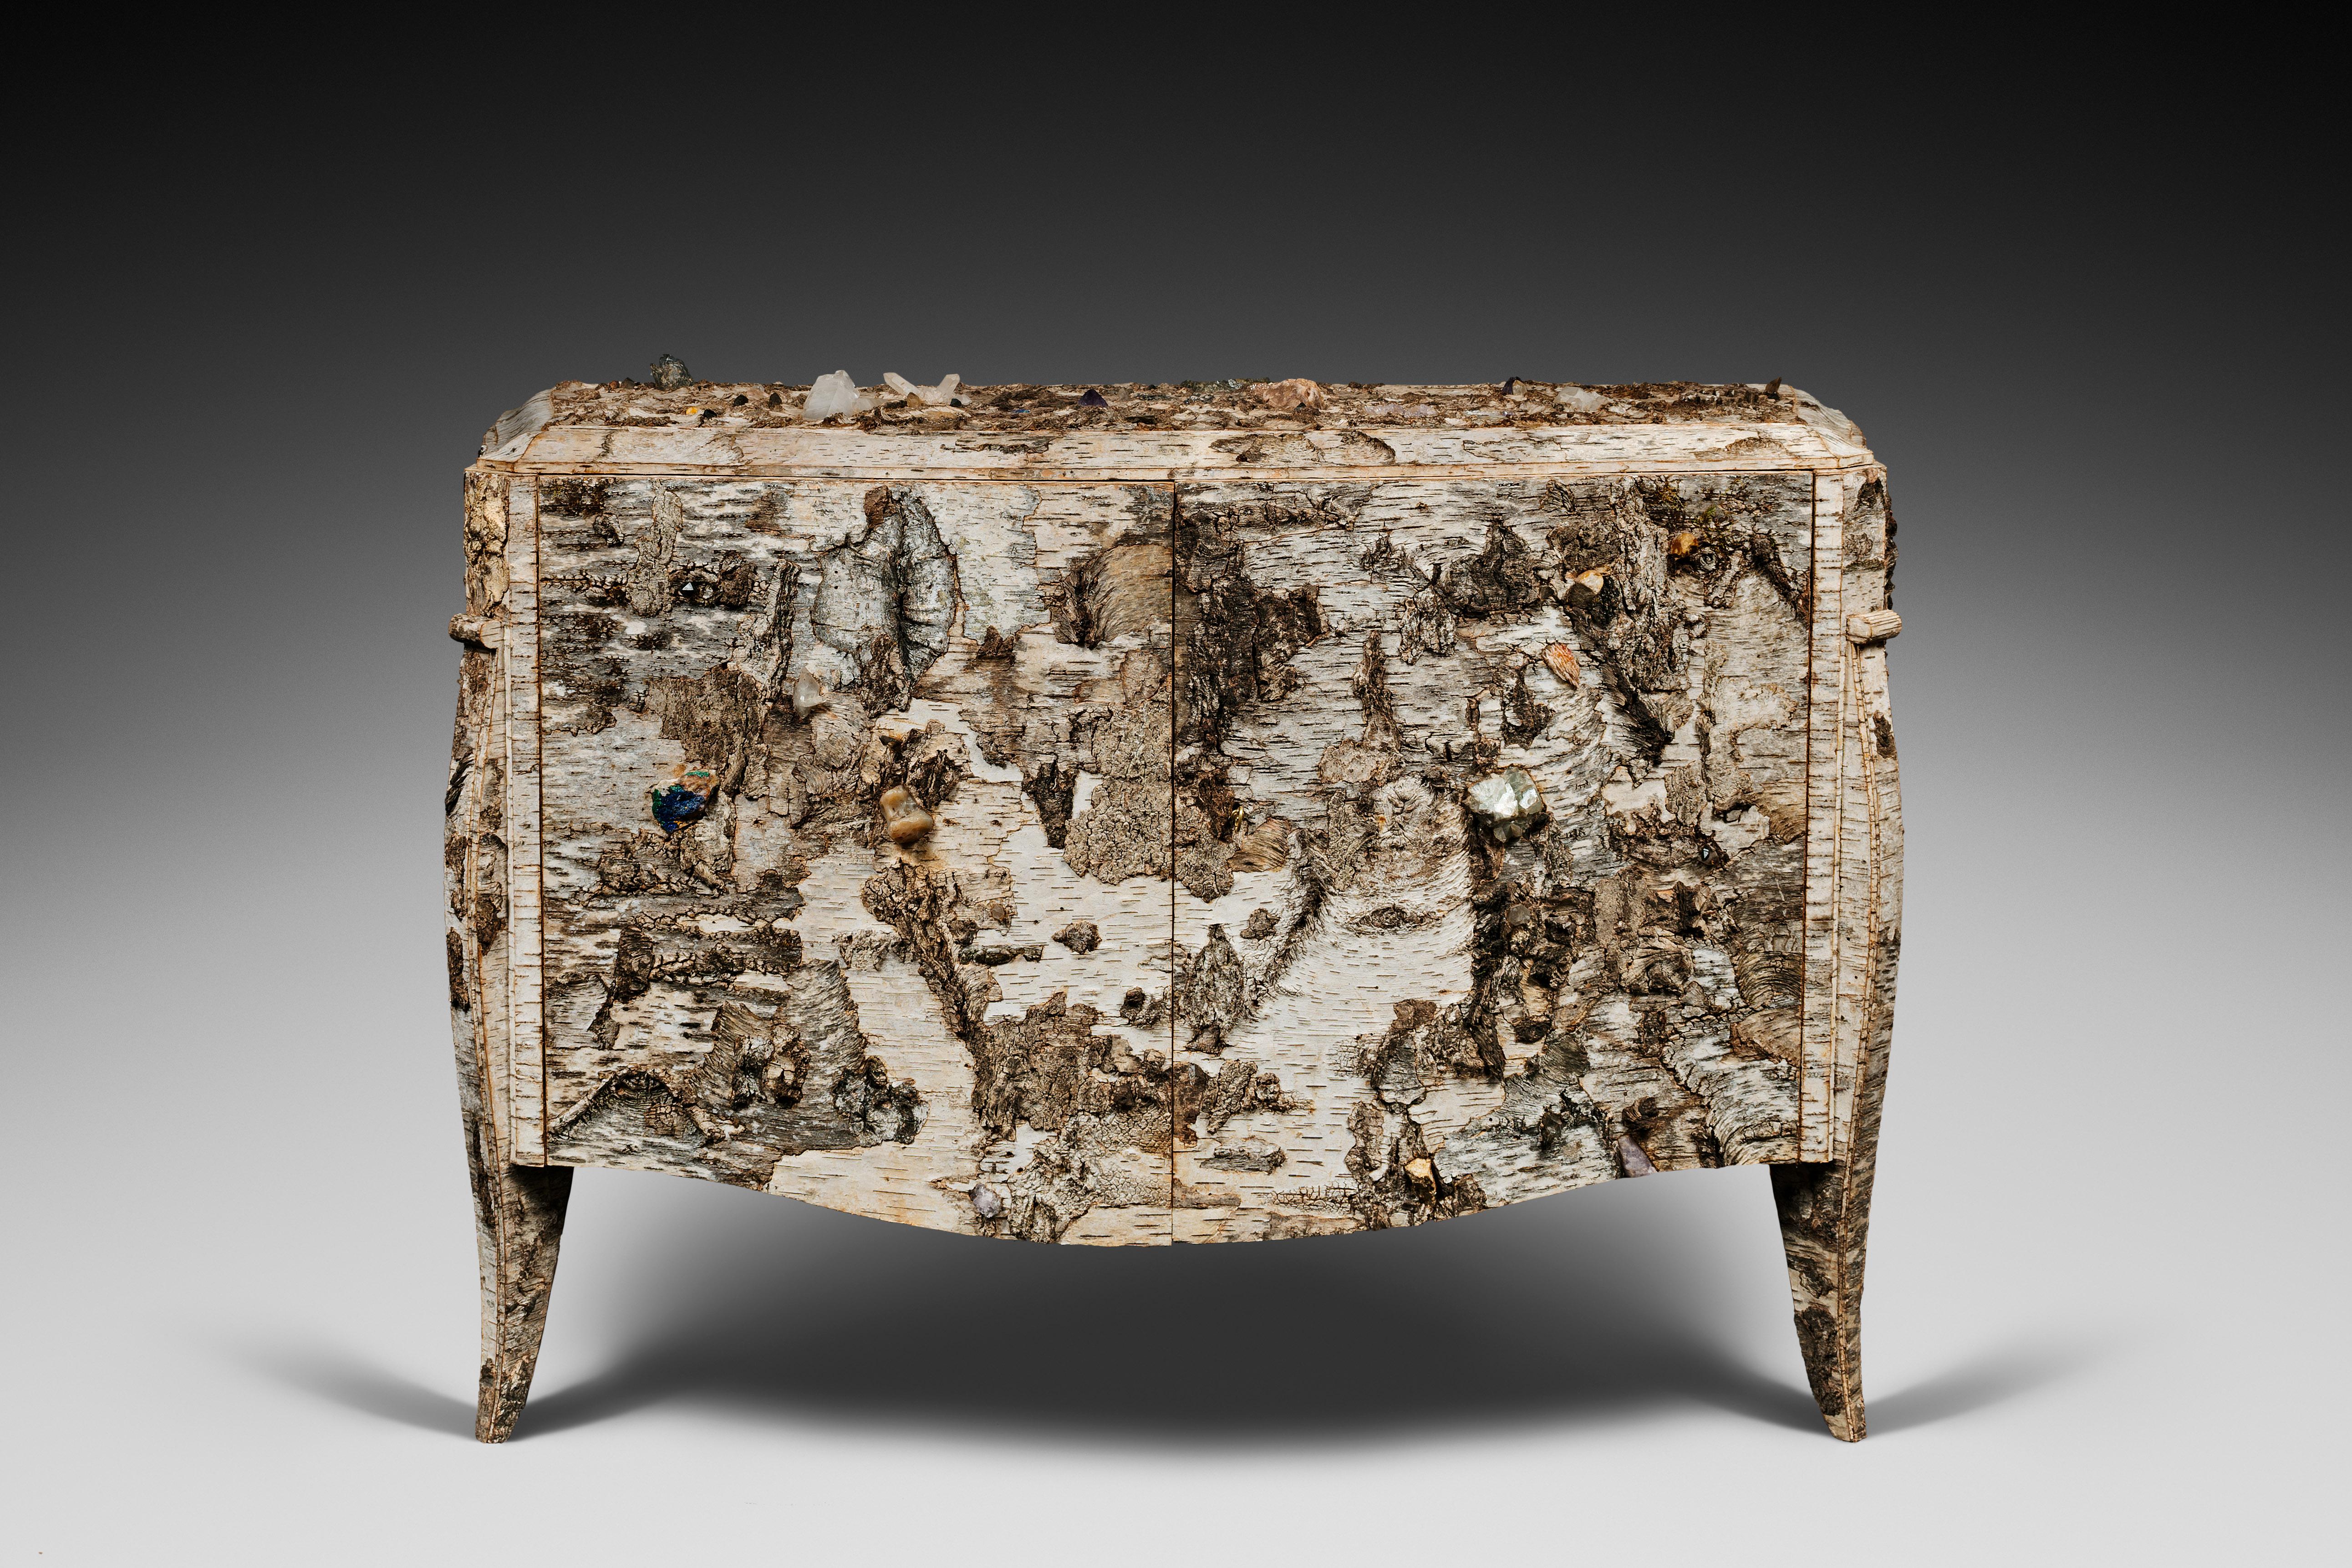 IMPORTANT 1925 DRESSER WITH BIRCHBARK AND INLAID WITH MINERALS
Unique piece
Sophie Gallardo & Georges Cassan
Height: 93 cm
Length: 137 cm
Width: 56 cm
Birch bark marquetry and mineral inlays
Interior: turn inside out calf
This 1925 dresser opens